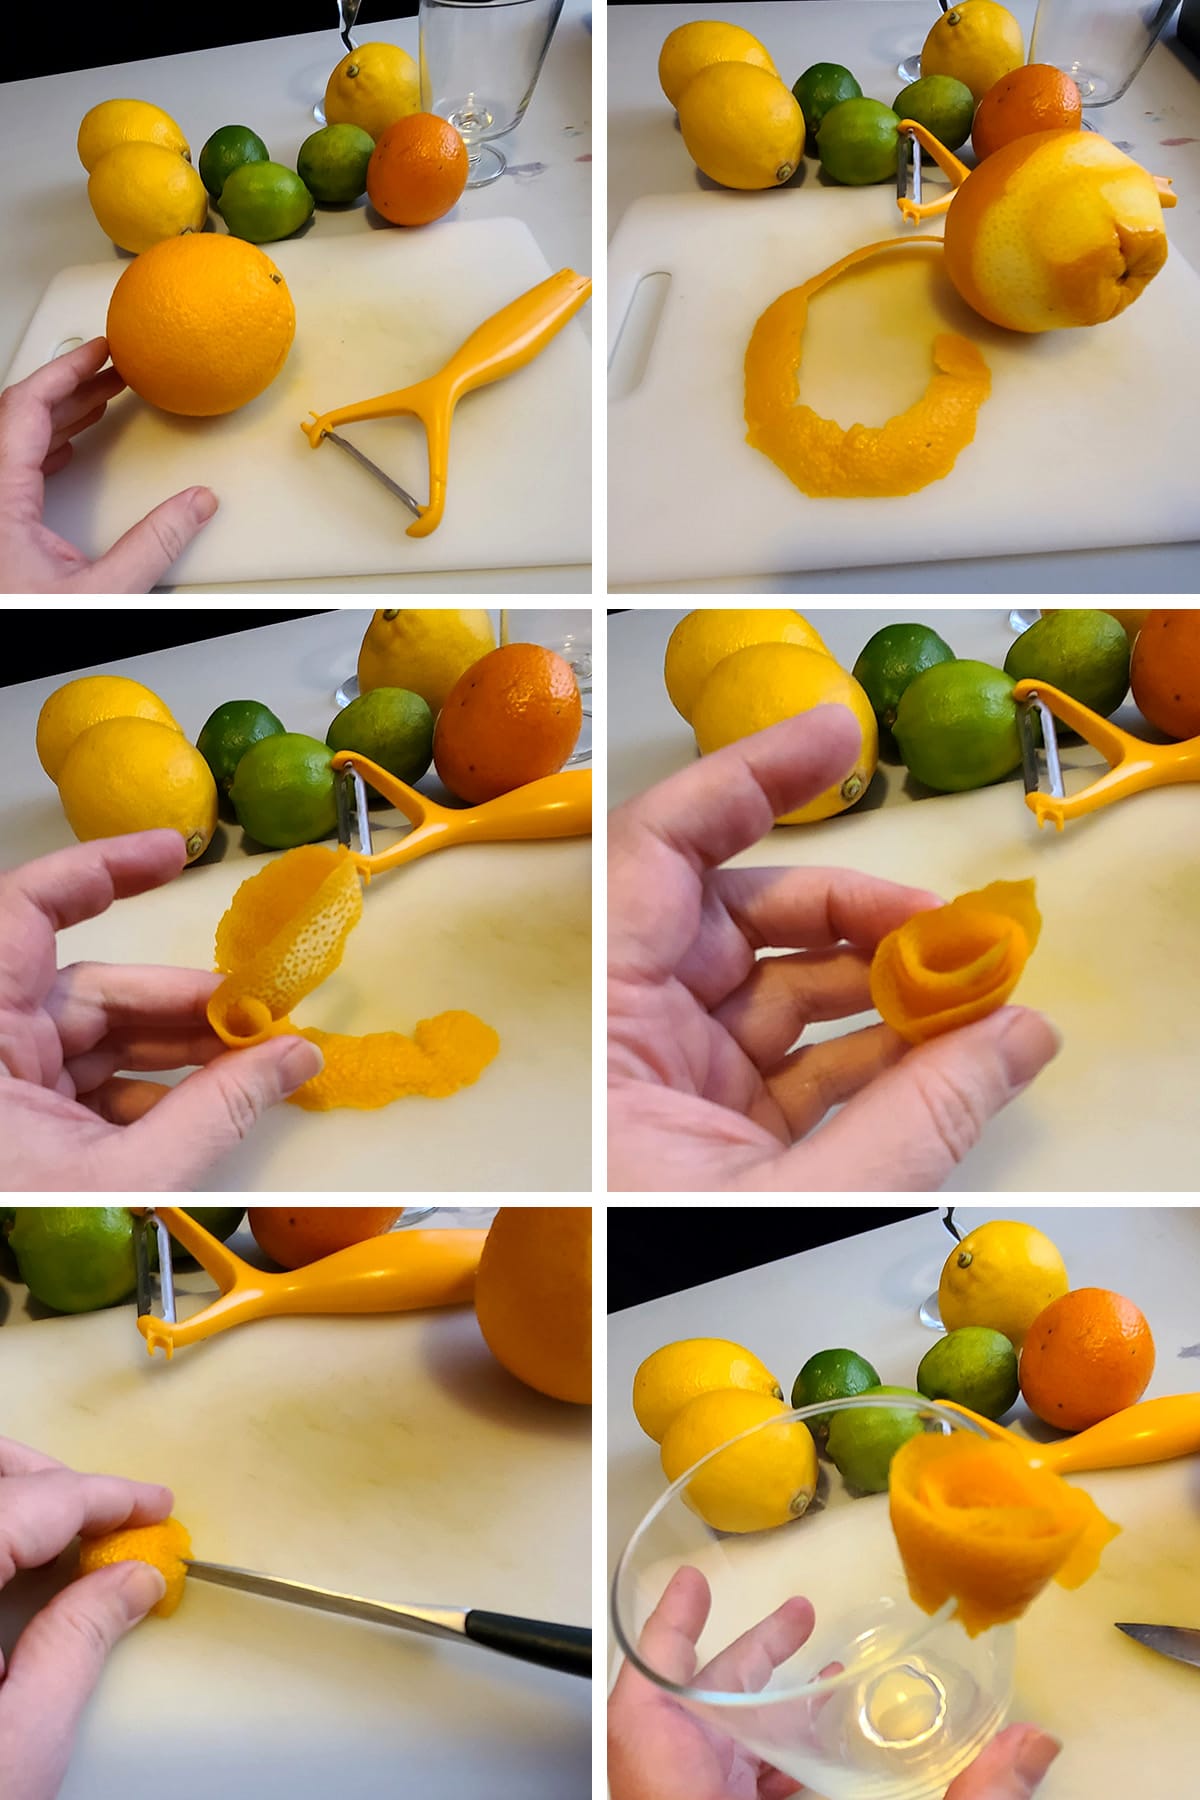 A 6 part compilation image showing the steps involved with making the main section of a rose garnish, as described in the post.